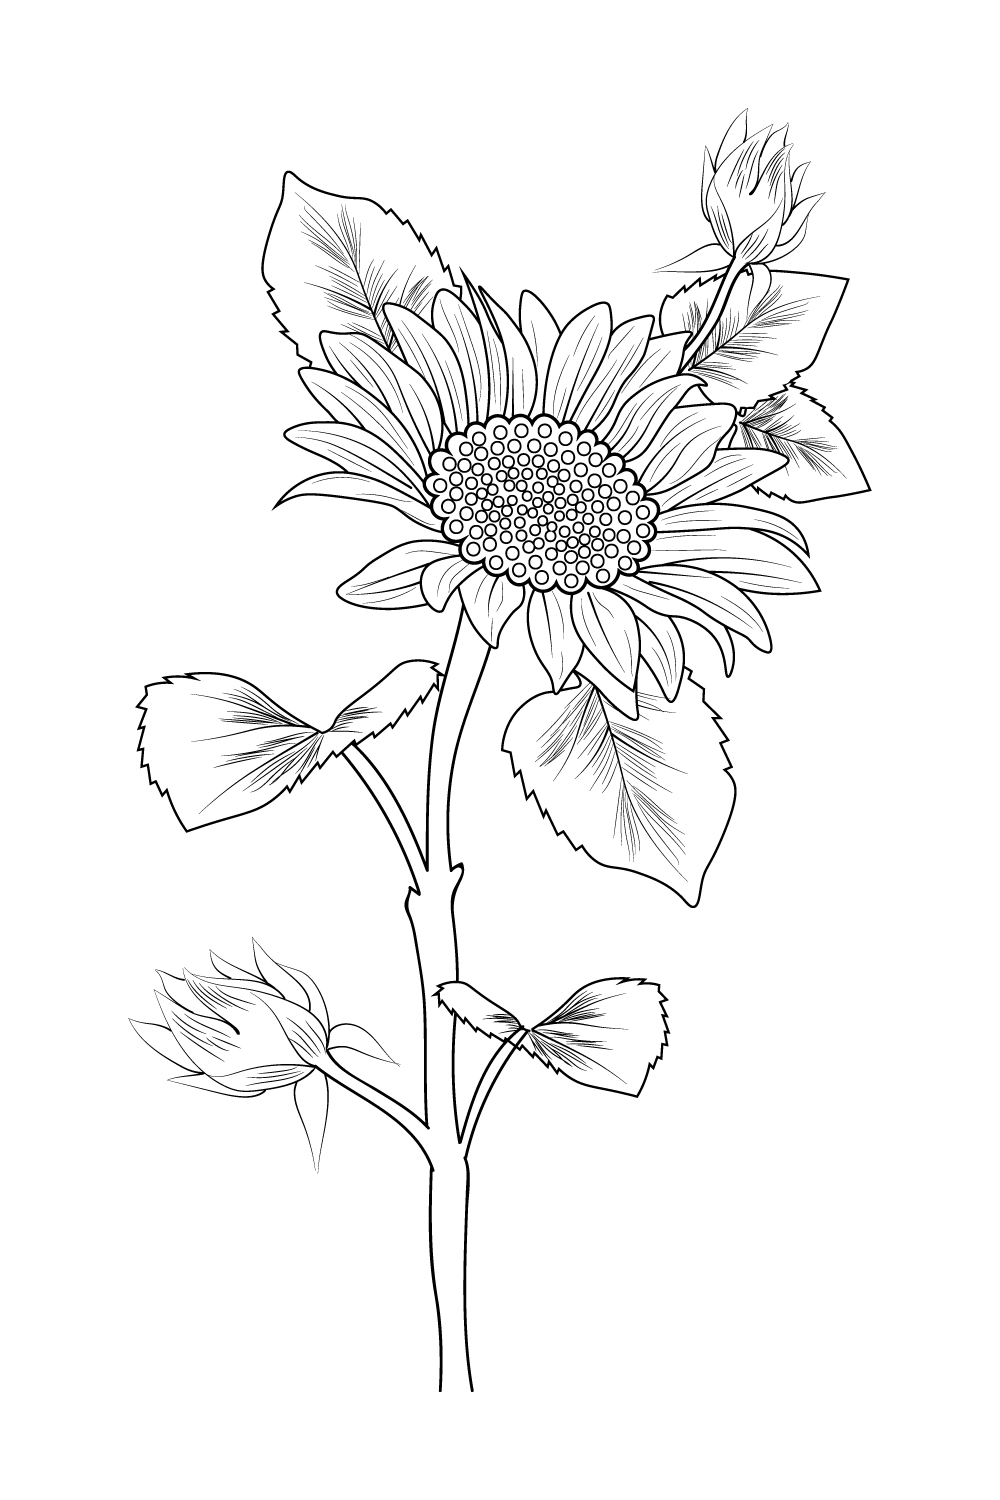 Sunflower Outline Silhouette Vector Images, Pics